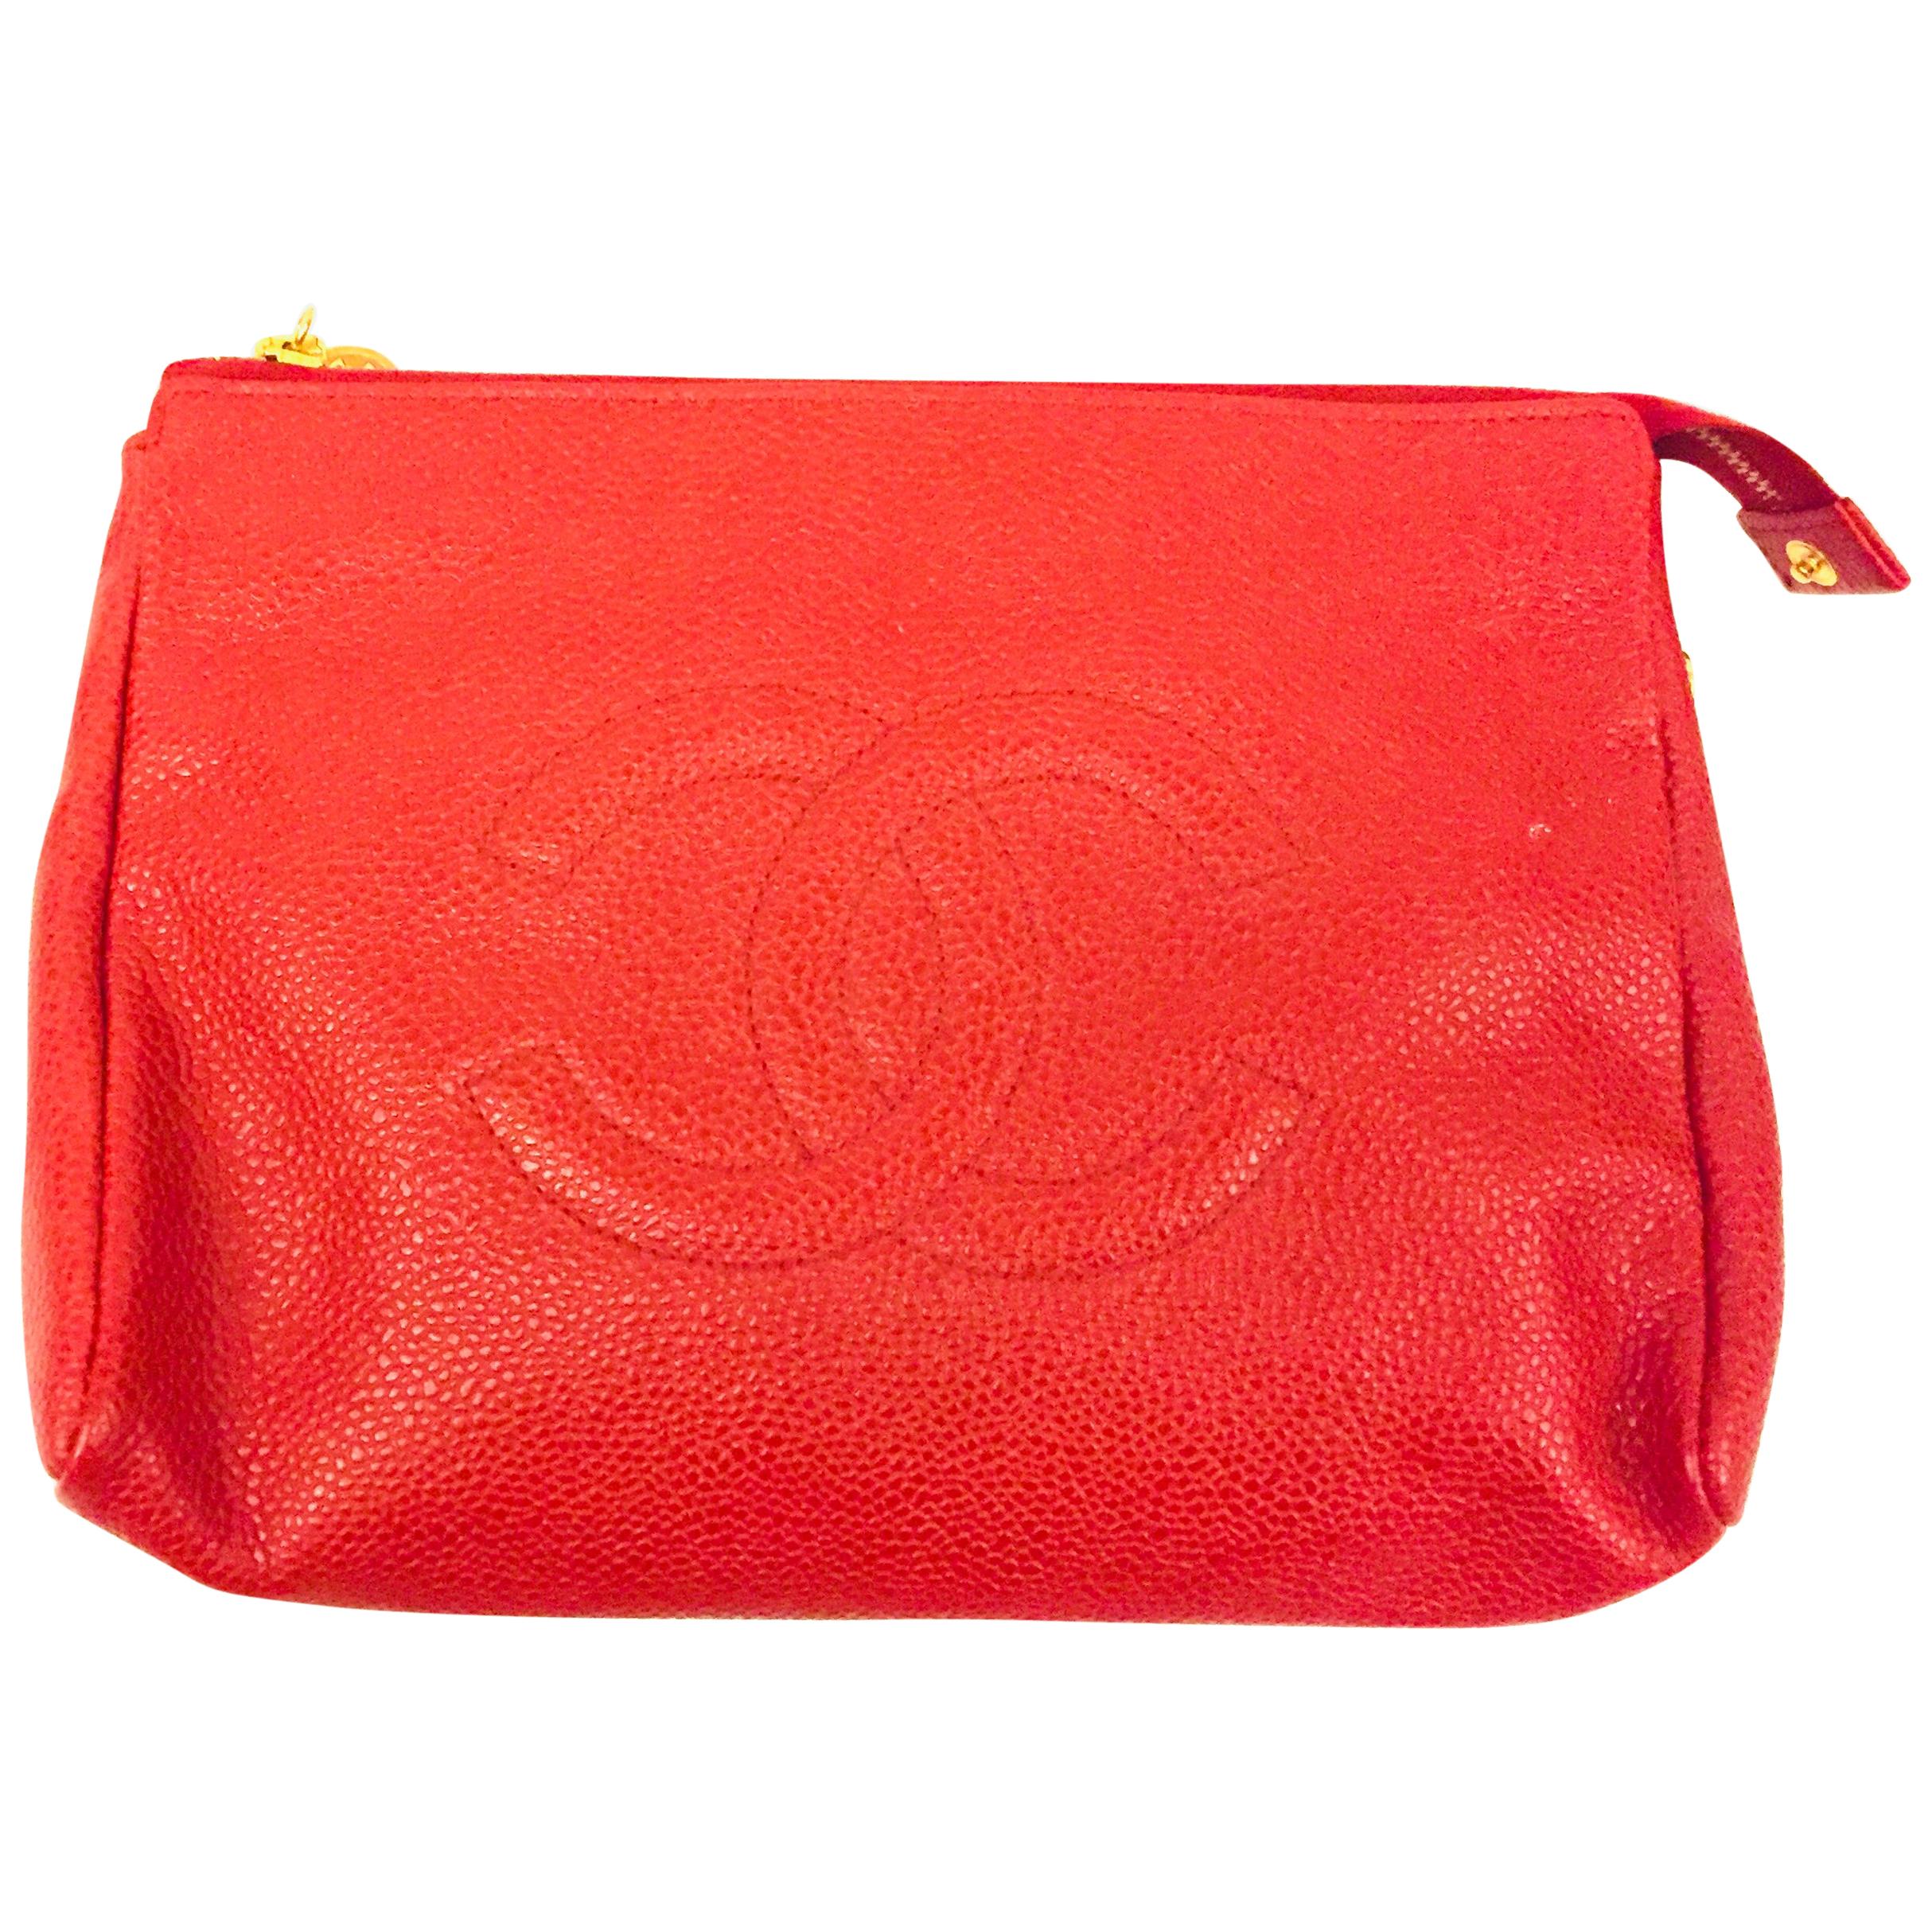 Chanel red caviar cosmetic bag 